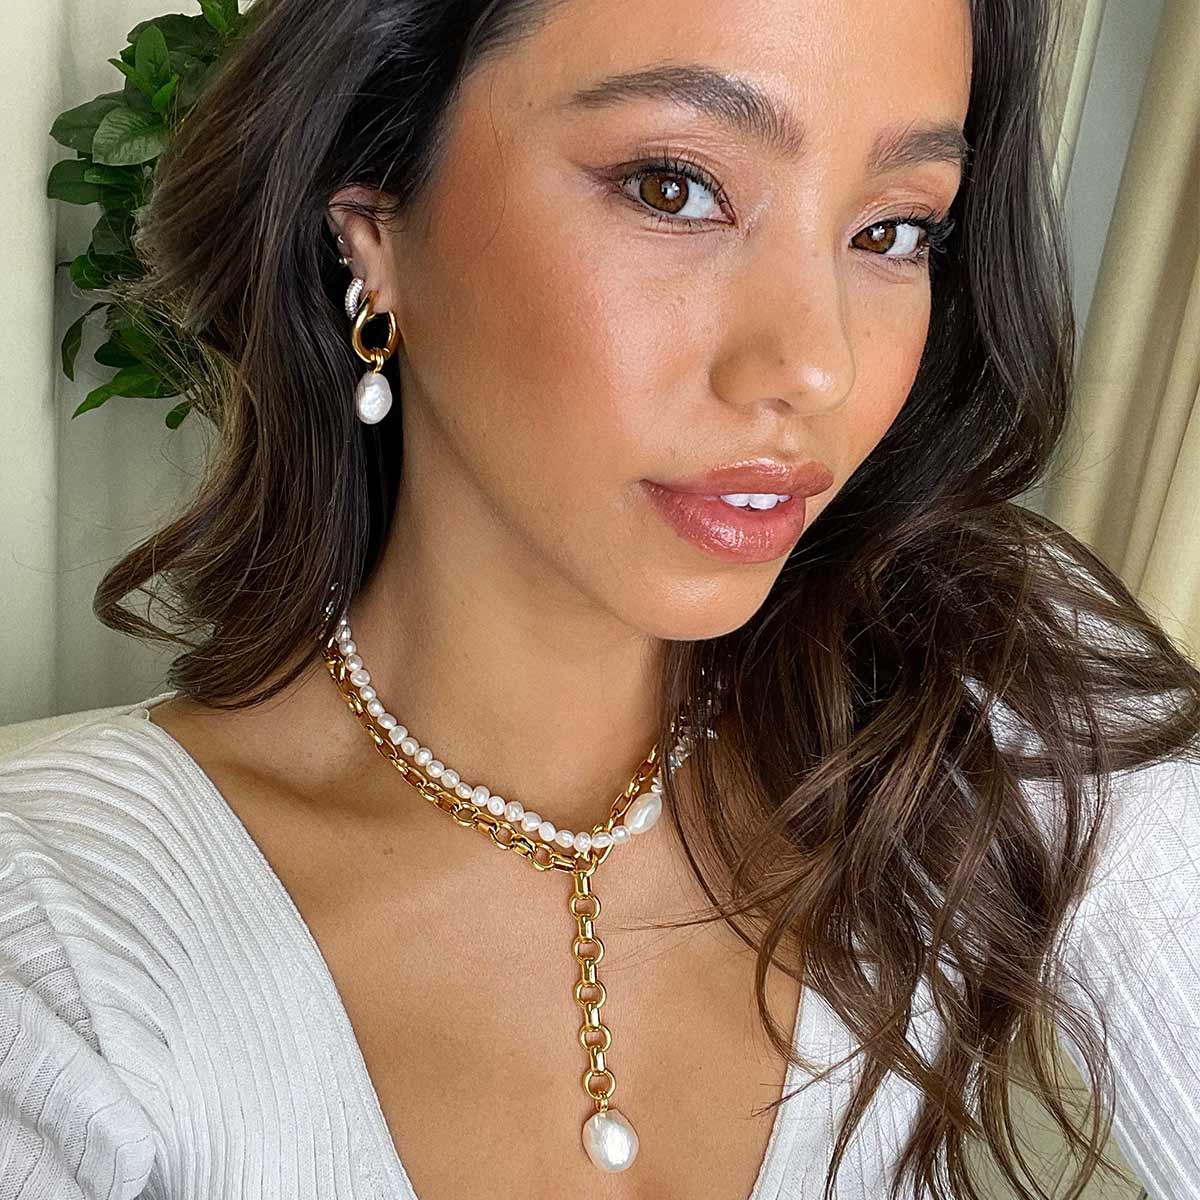 Serenity Pearl Link Chain Necklace in Gold worn by Olivia Miller